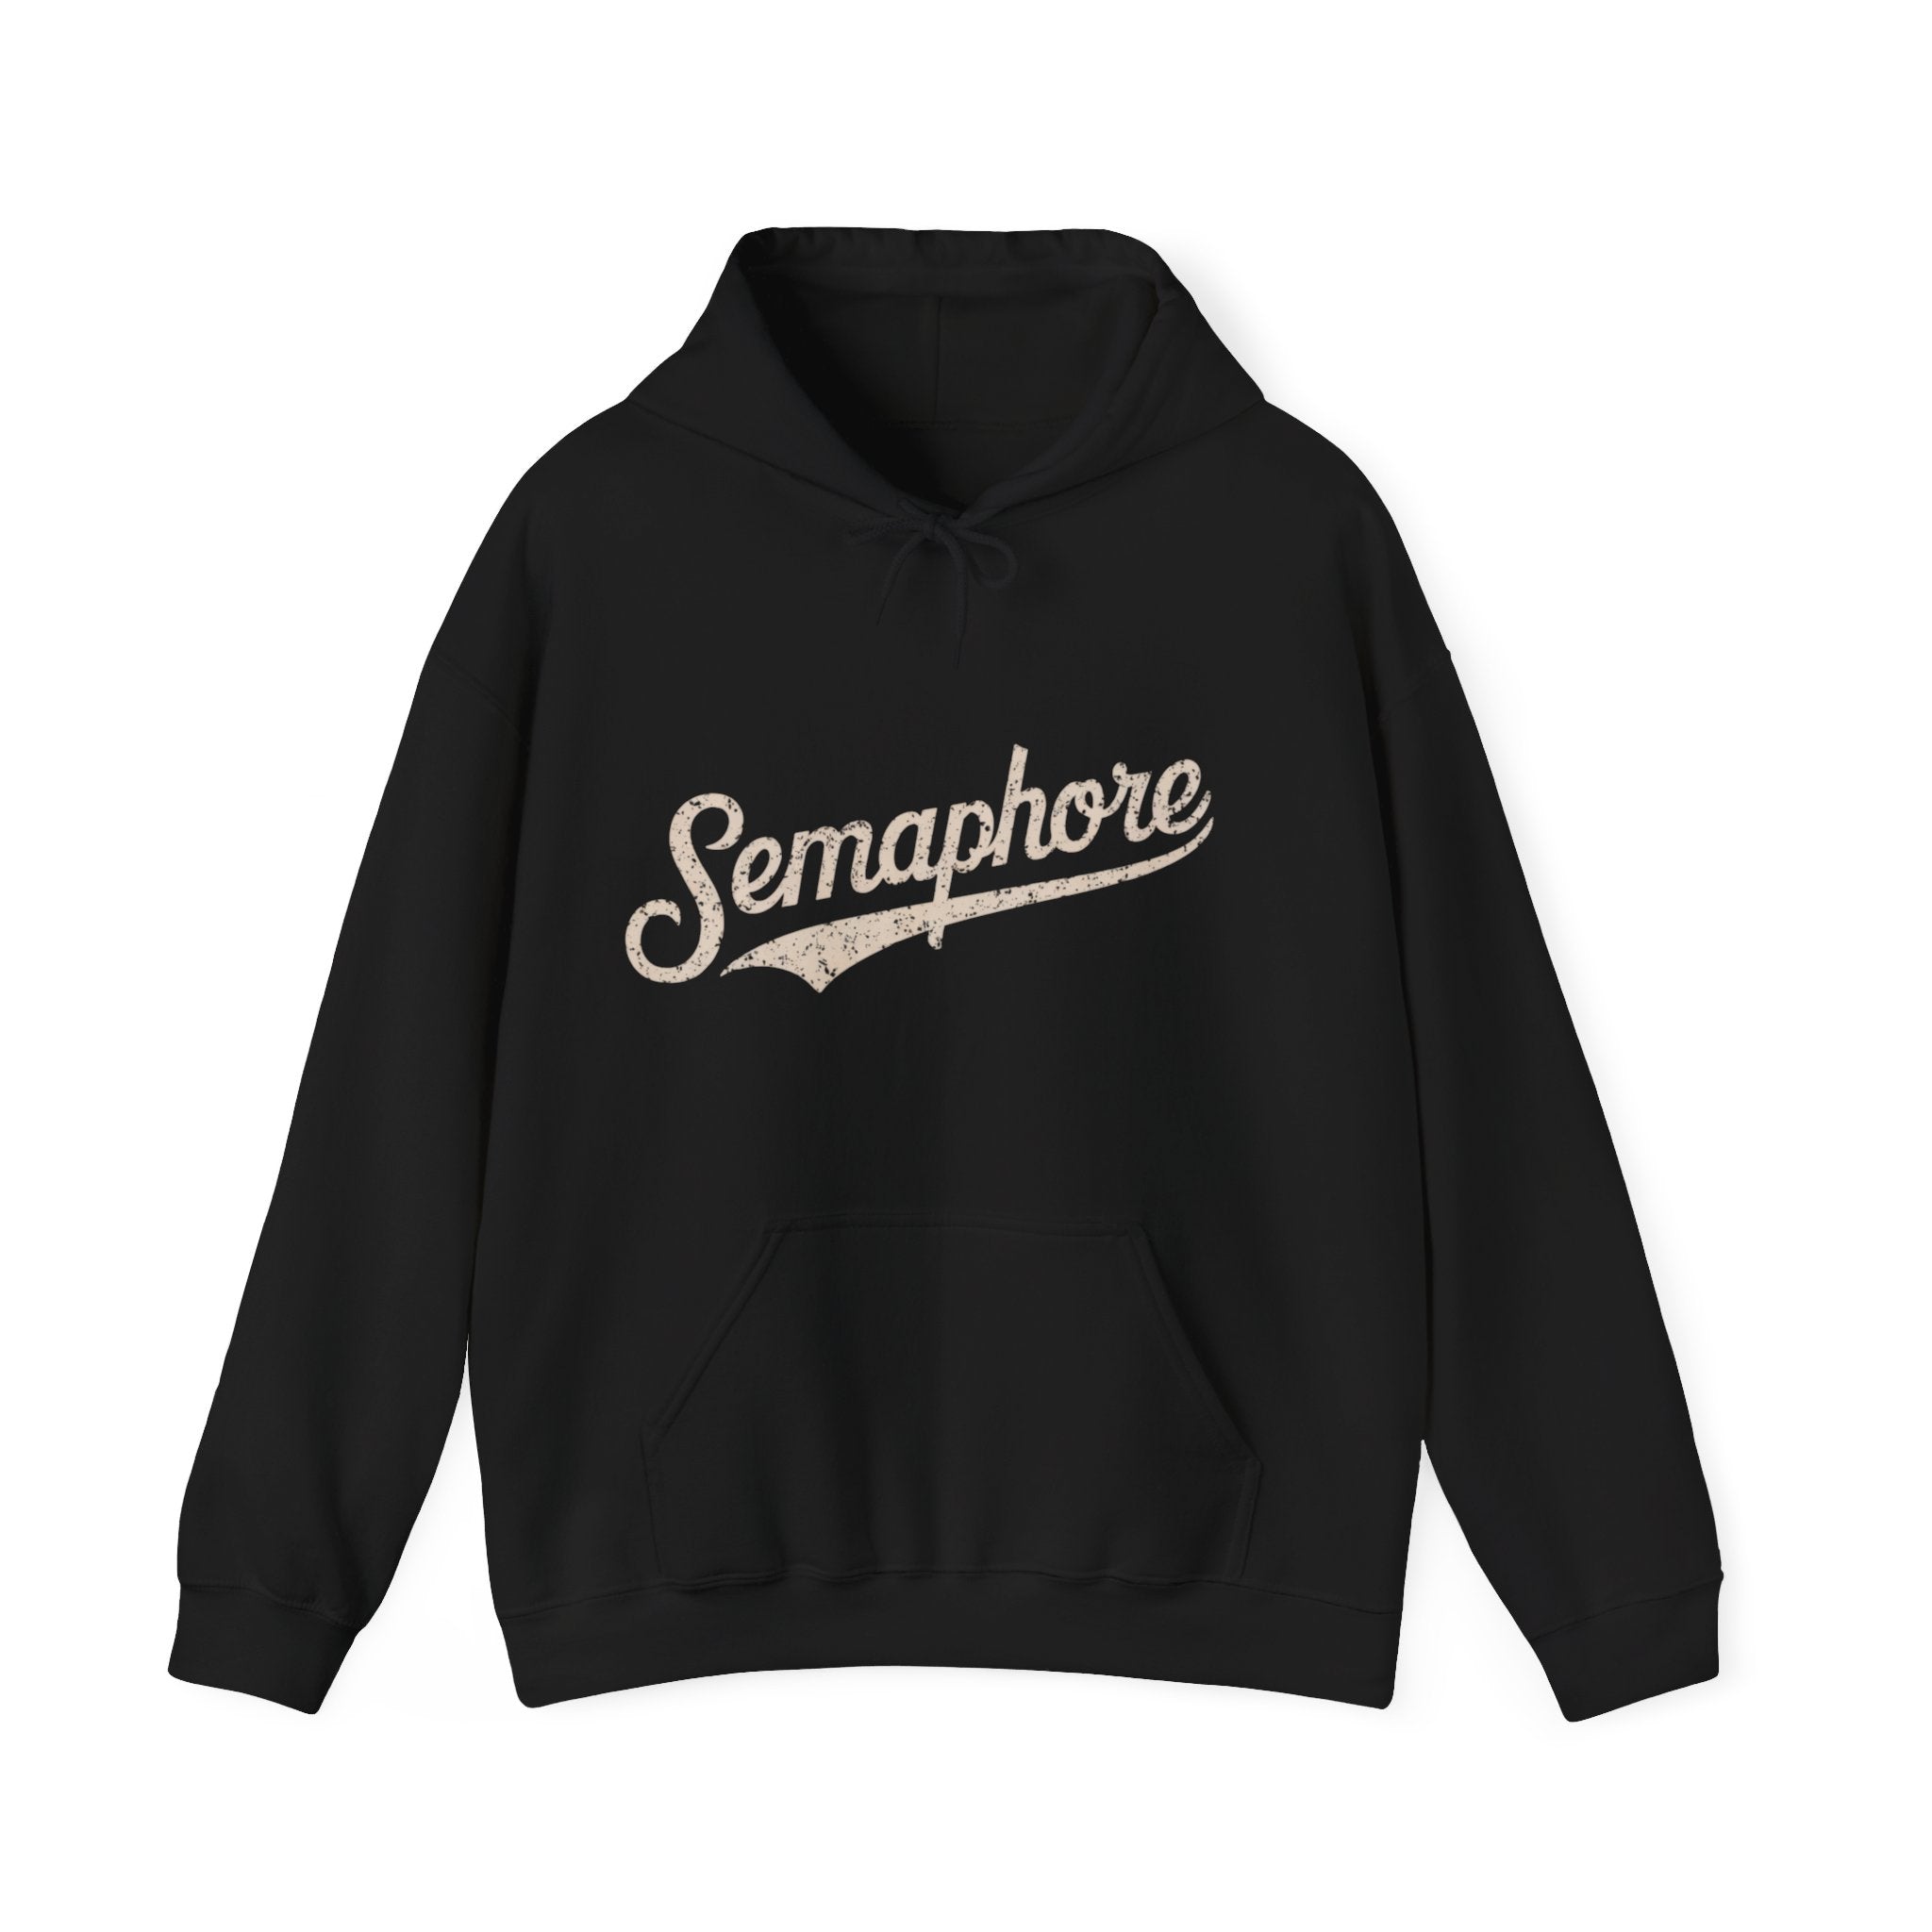 The Semaphore - Hooded Sweatshirt is a cozy classic fit black pullover with a drawstring hood and front pocket. "Semaphore" is elegantly printed in white cursive script across the chest, blending style and comfort seamlessly.